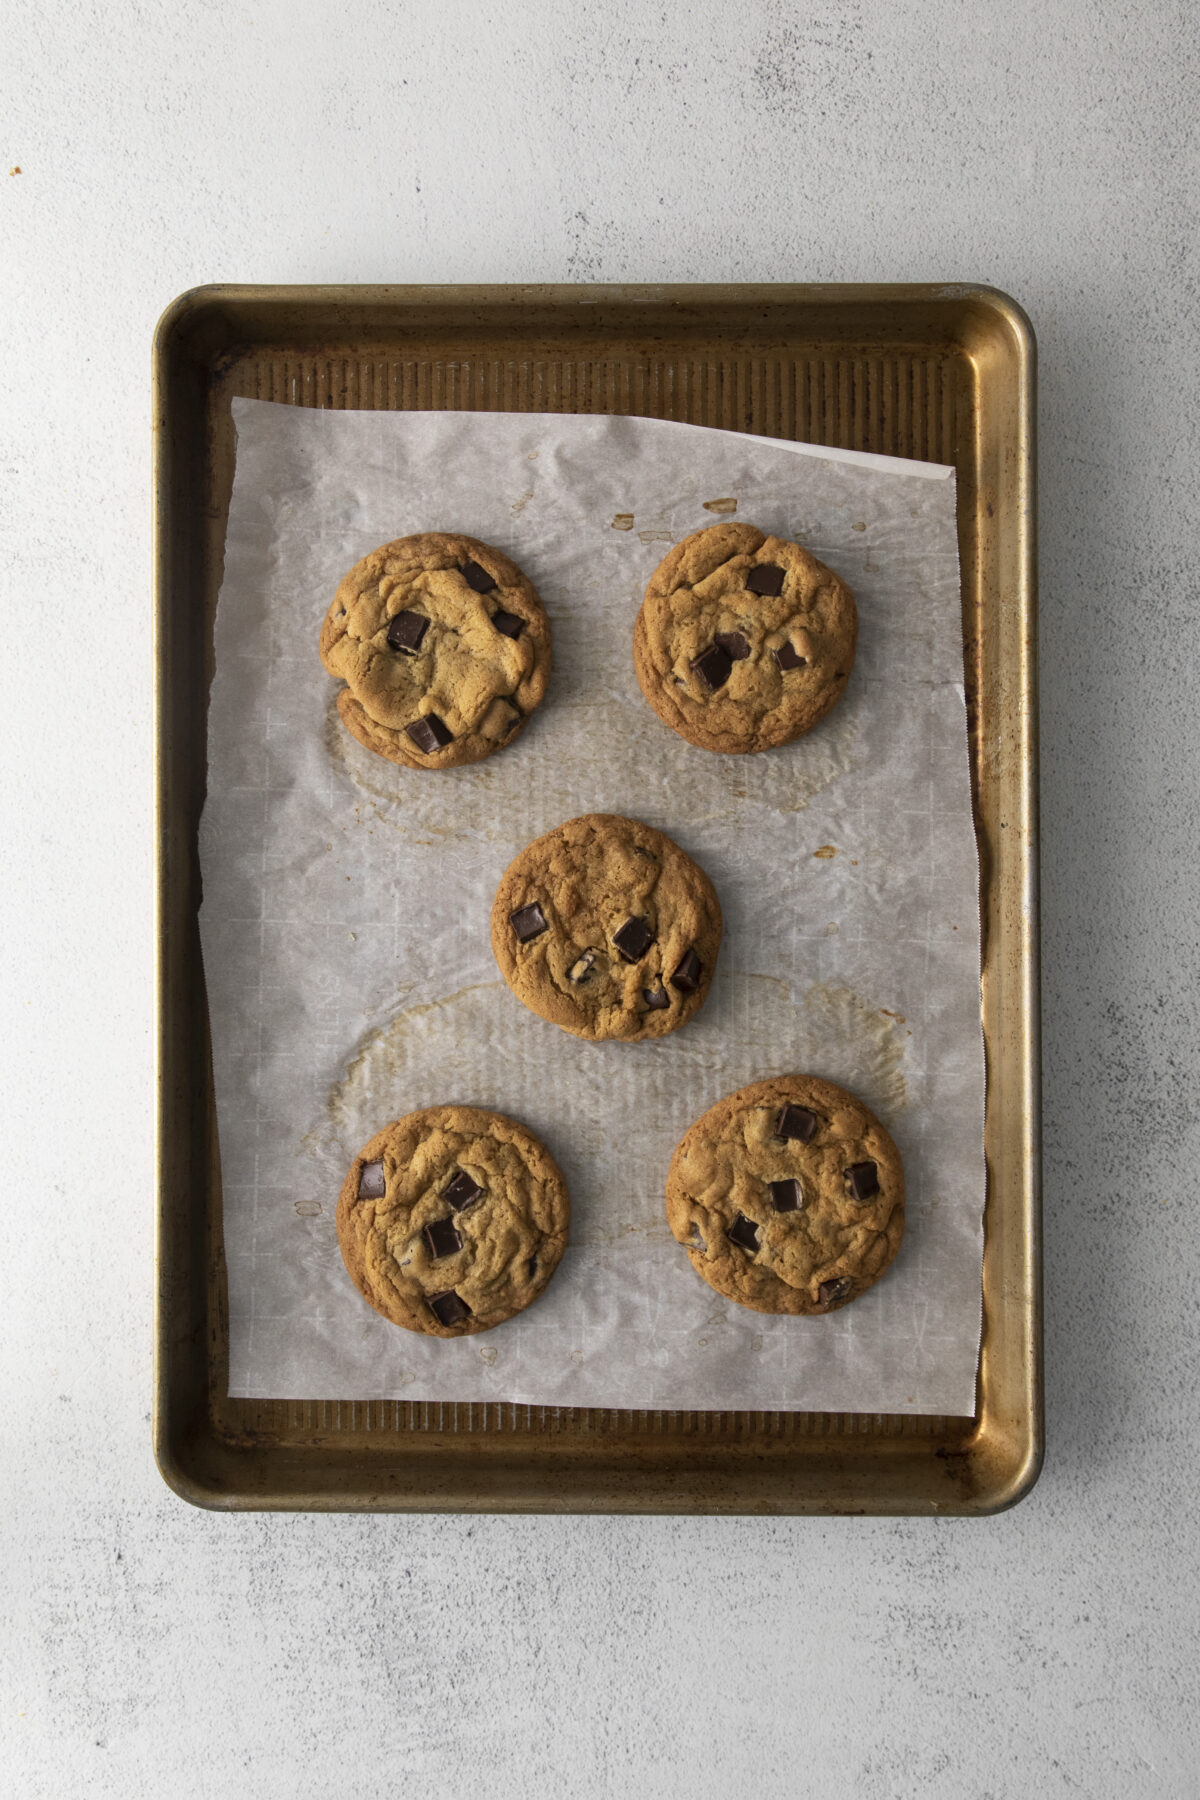 Love chocolate chip cookies? This salted tahini chocolate chip cookies recipe is a must-try for a unique and flavourful twist on the classic!